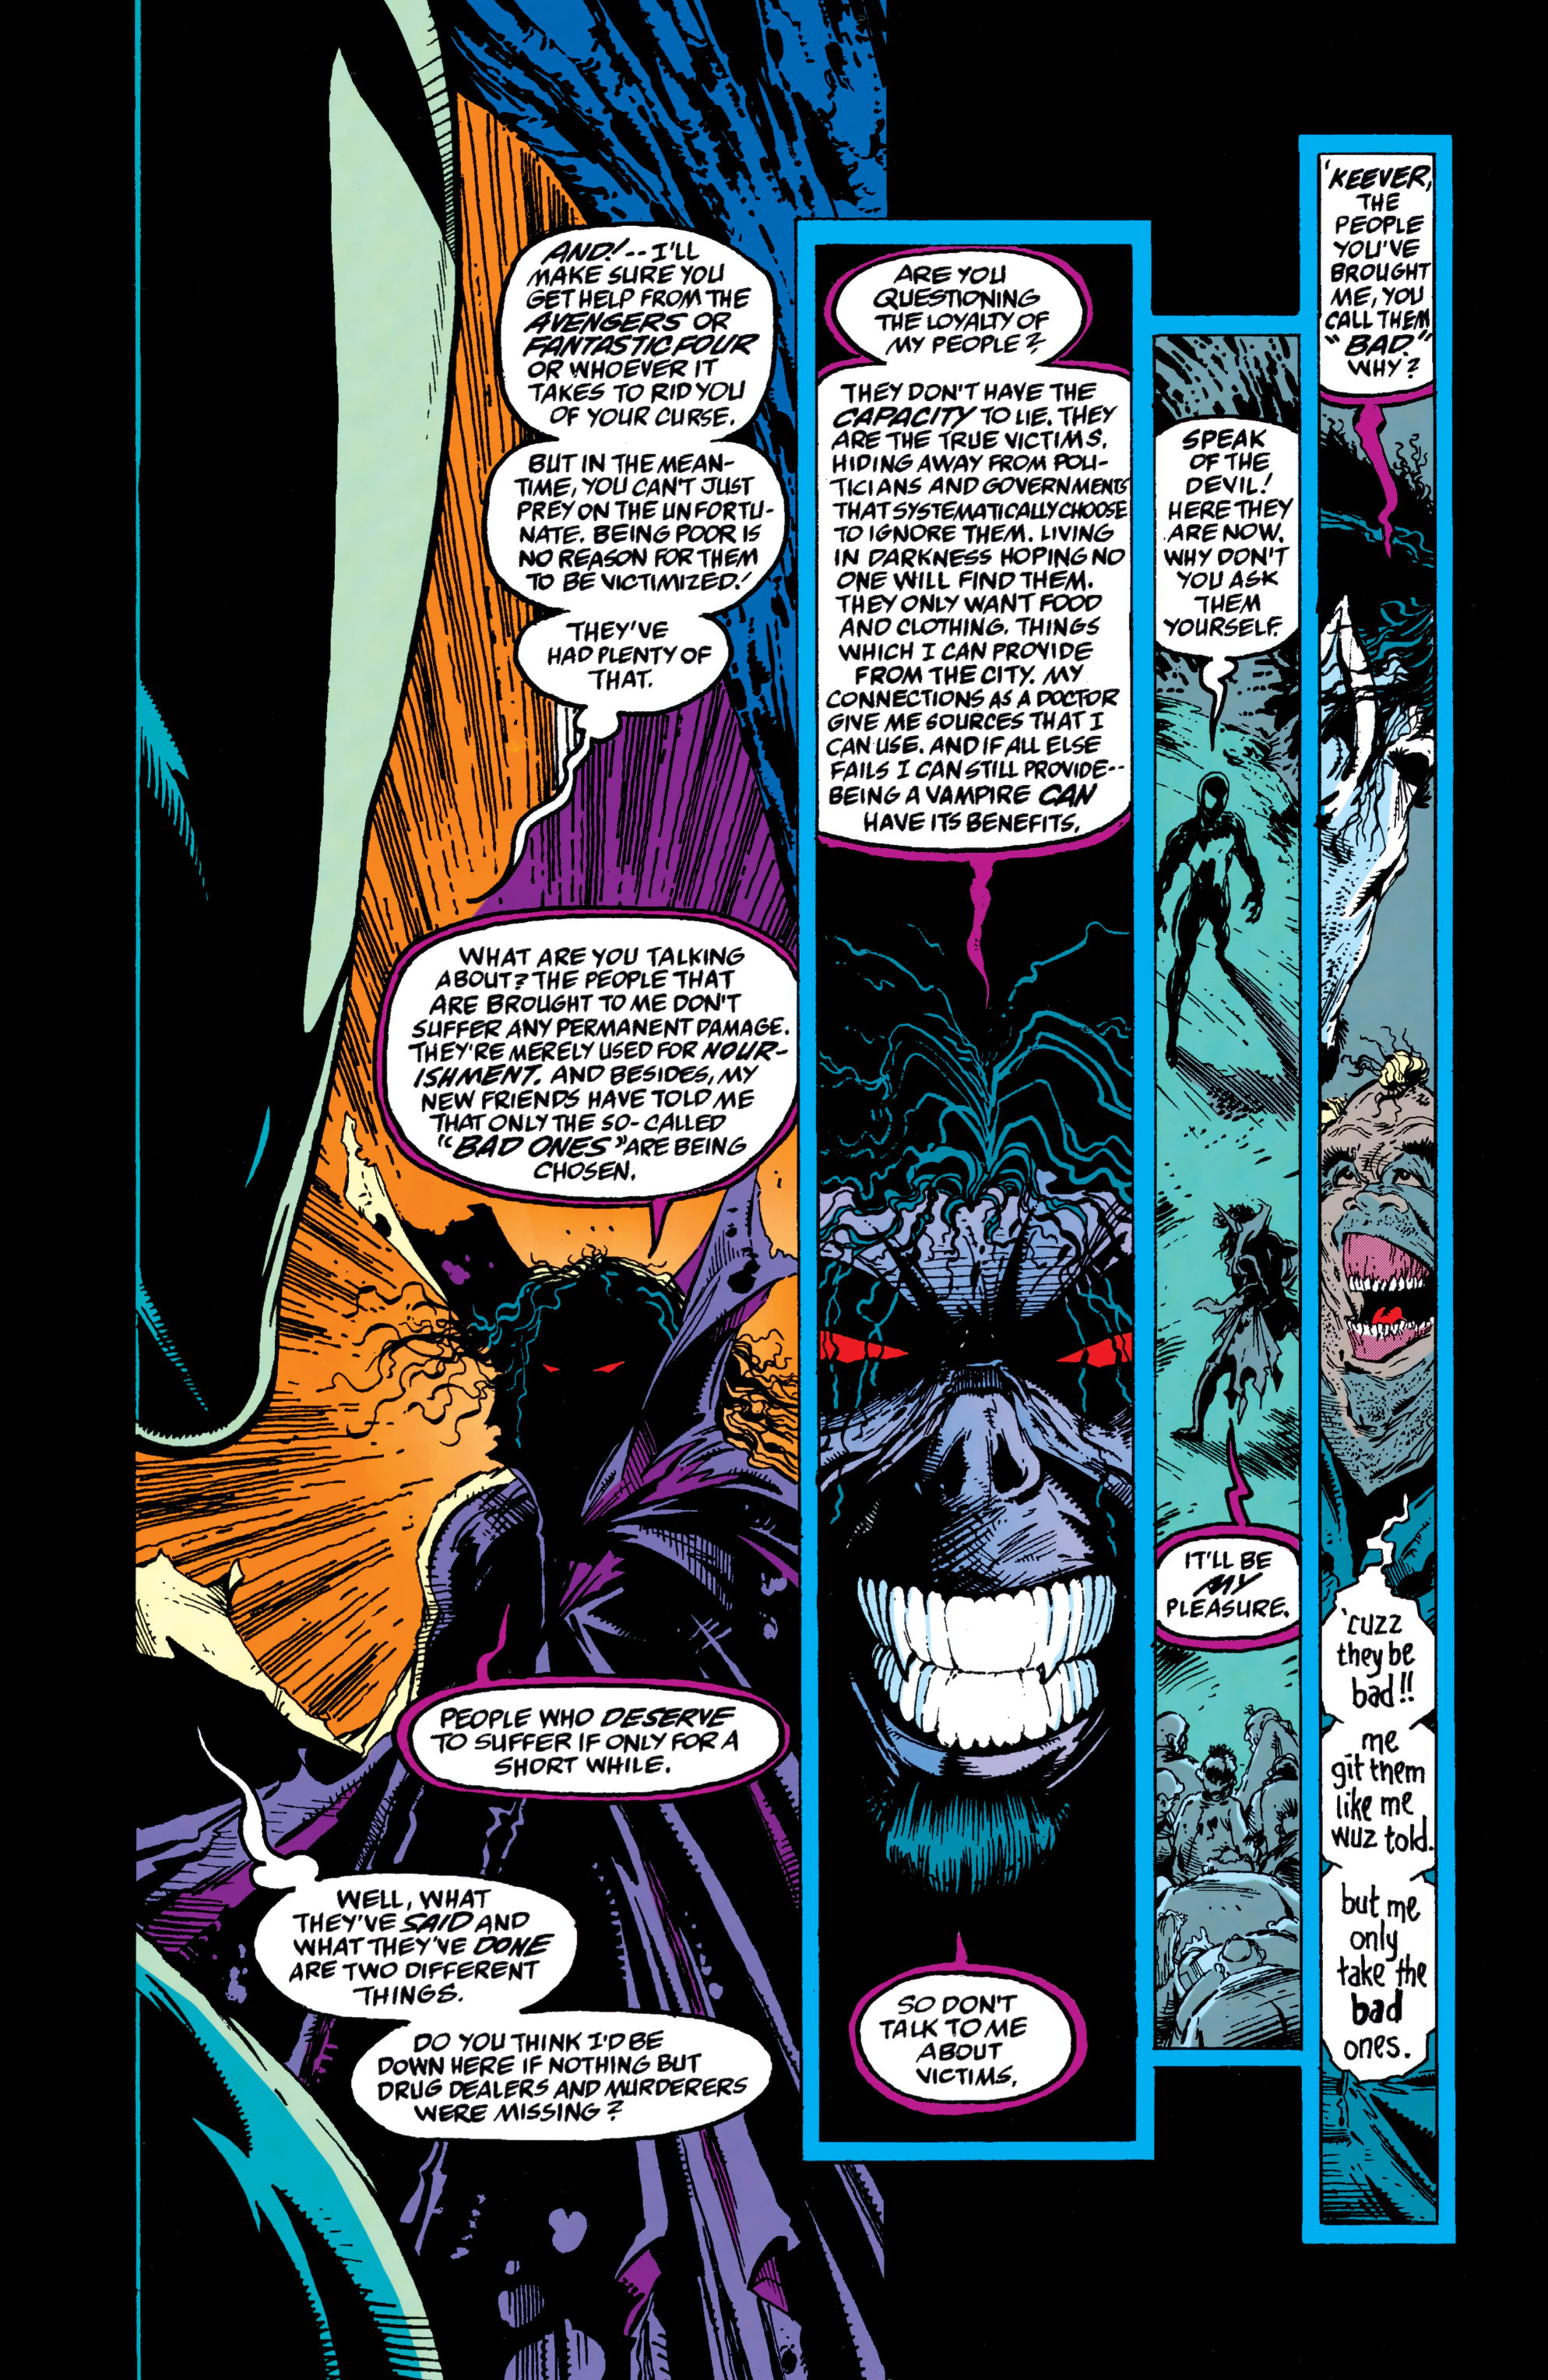 Spider-Man (1990) 14_-_Sub_City_Part_2_of_2 Page 16